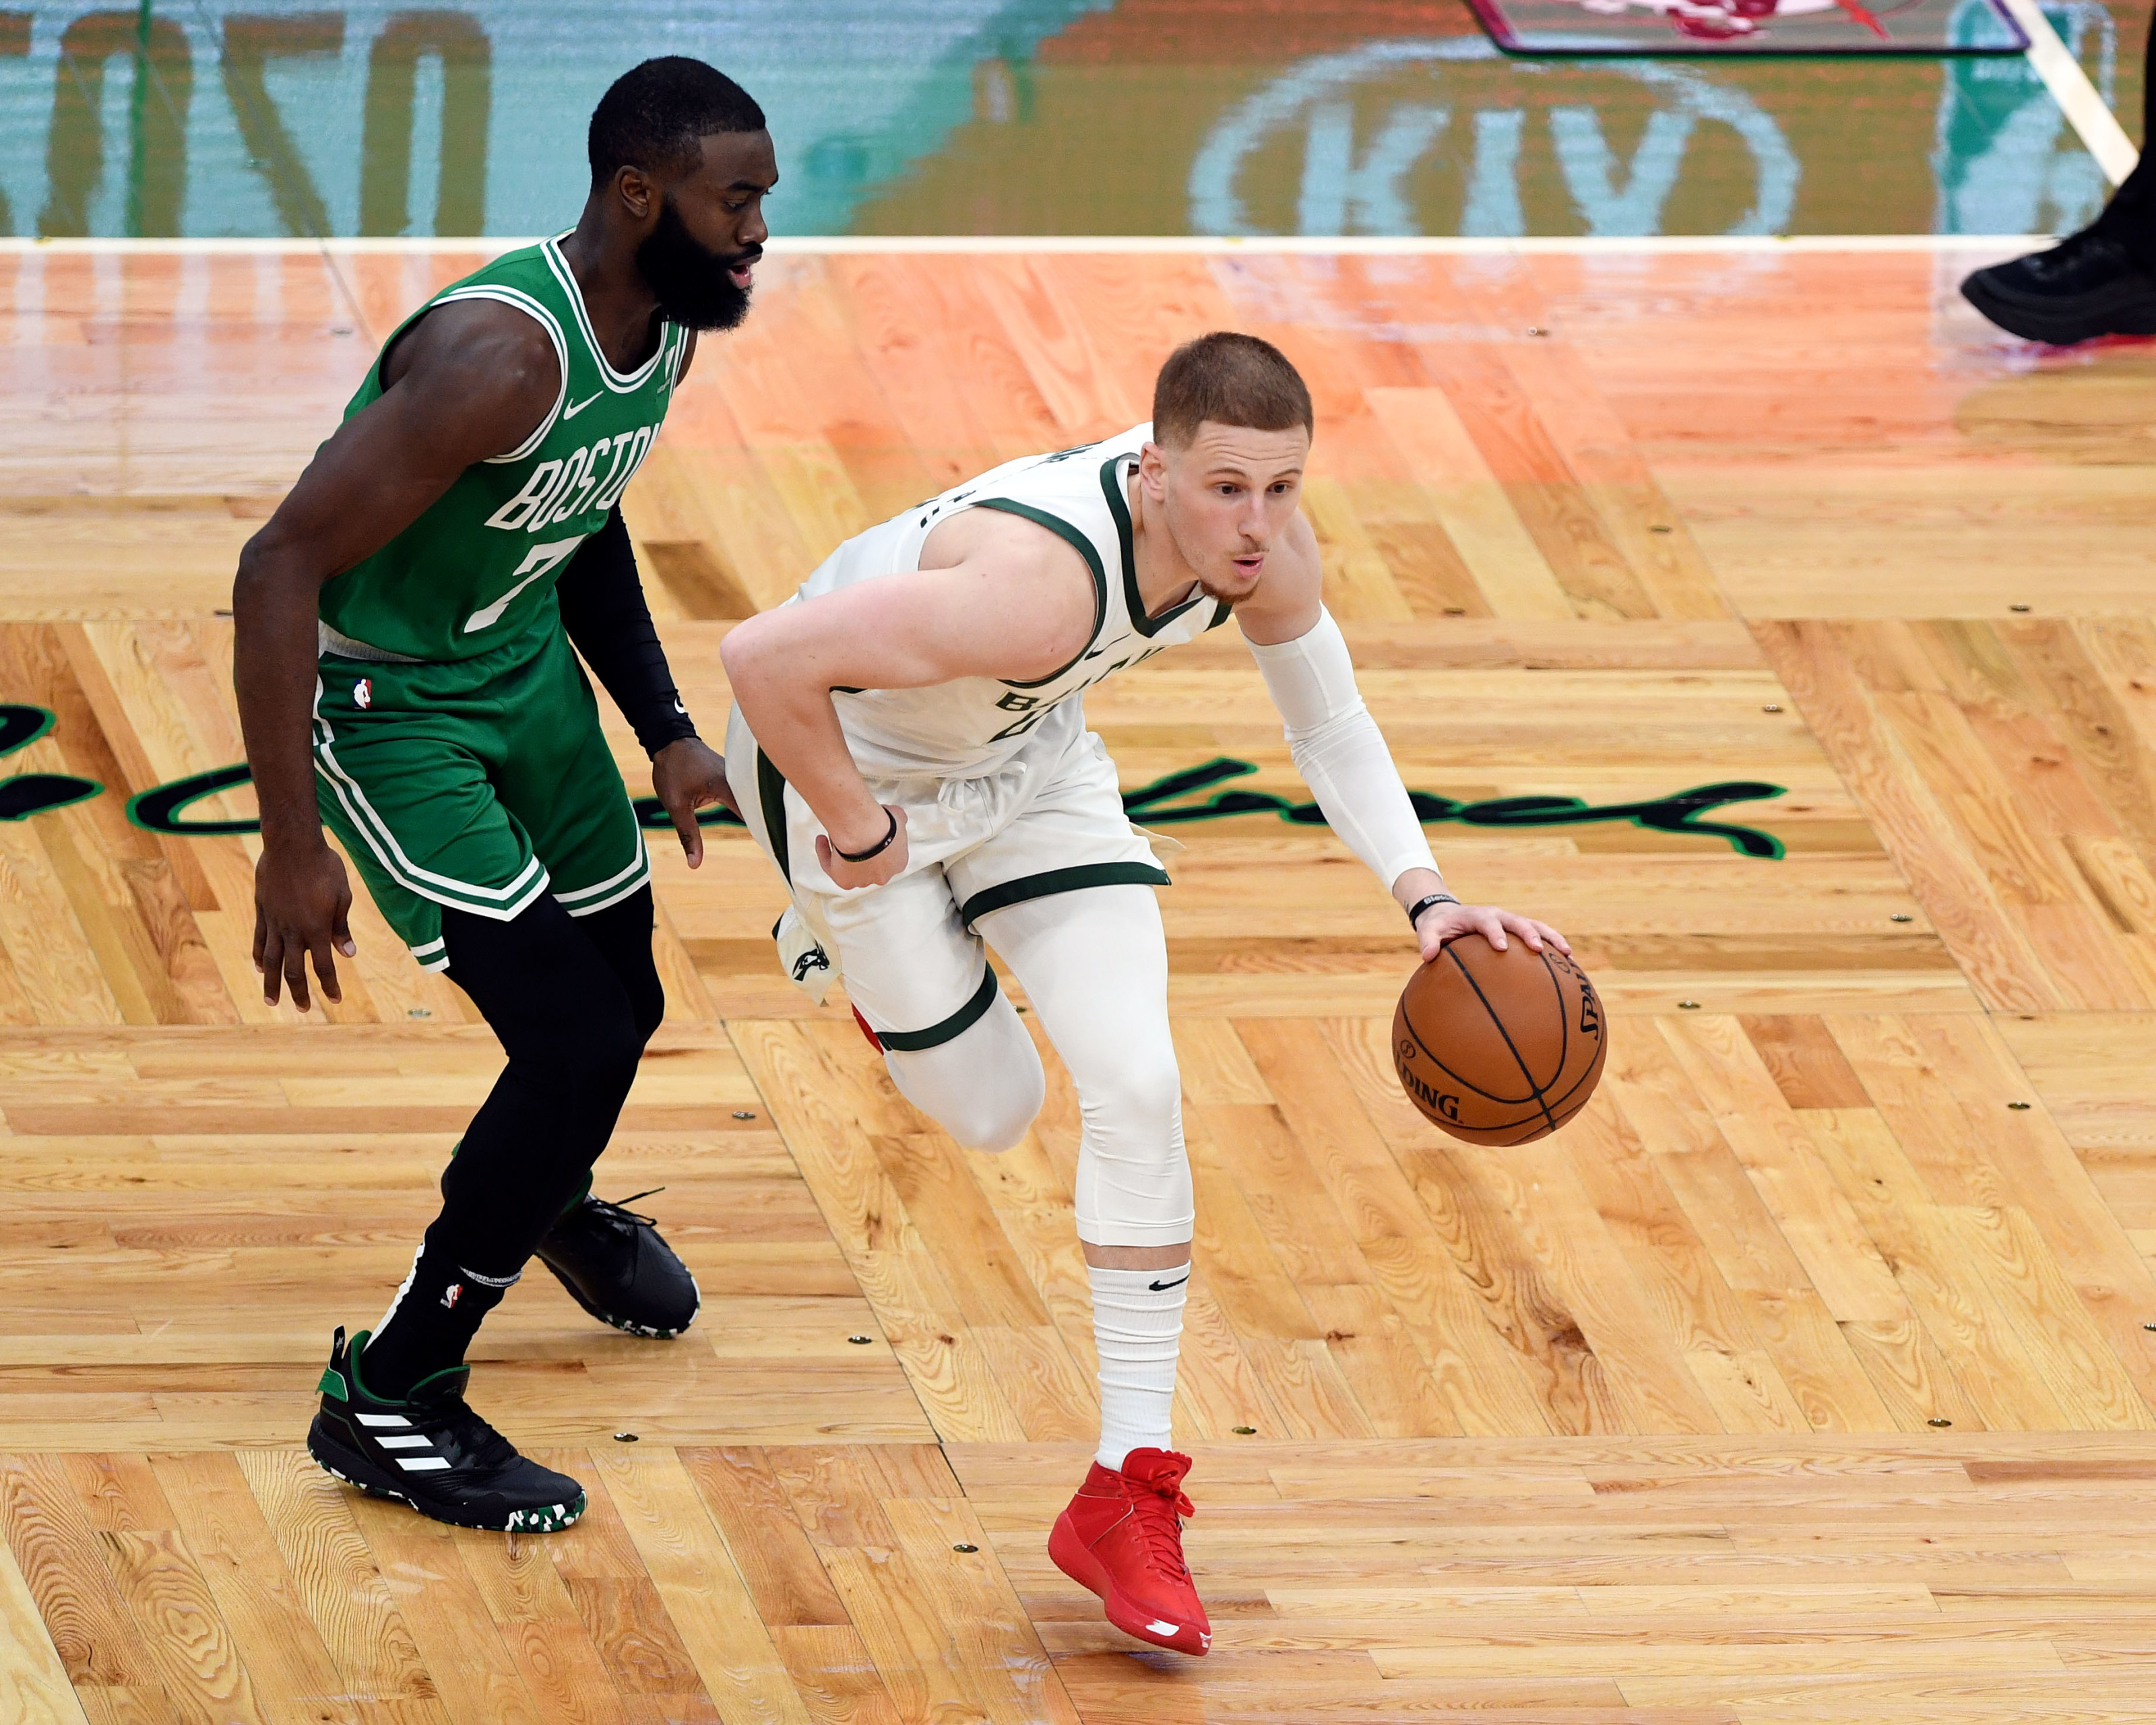 Milwaukee Bucks: 6 things to know about Donte DiVincenzo